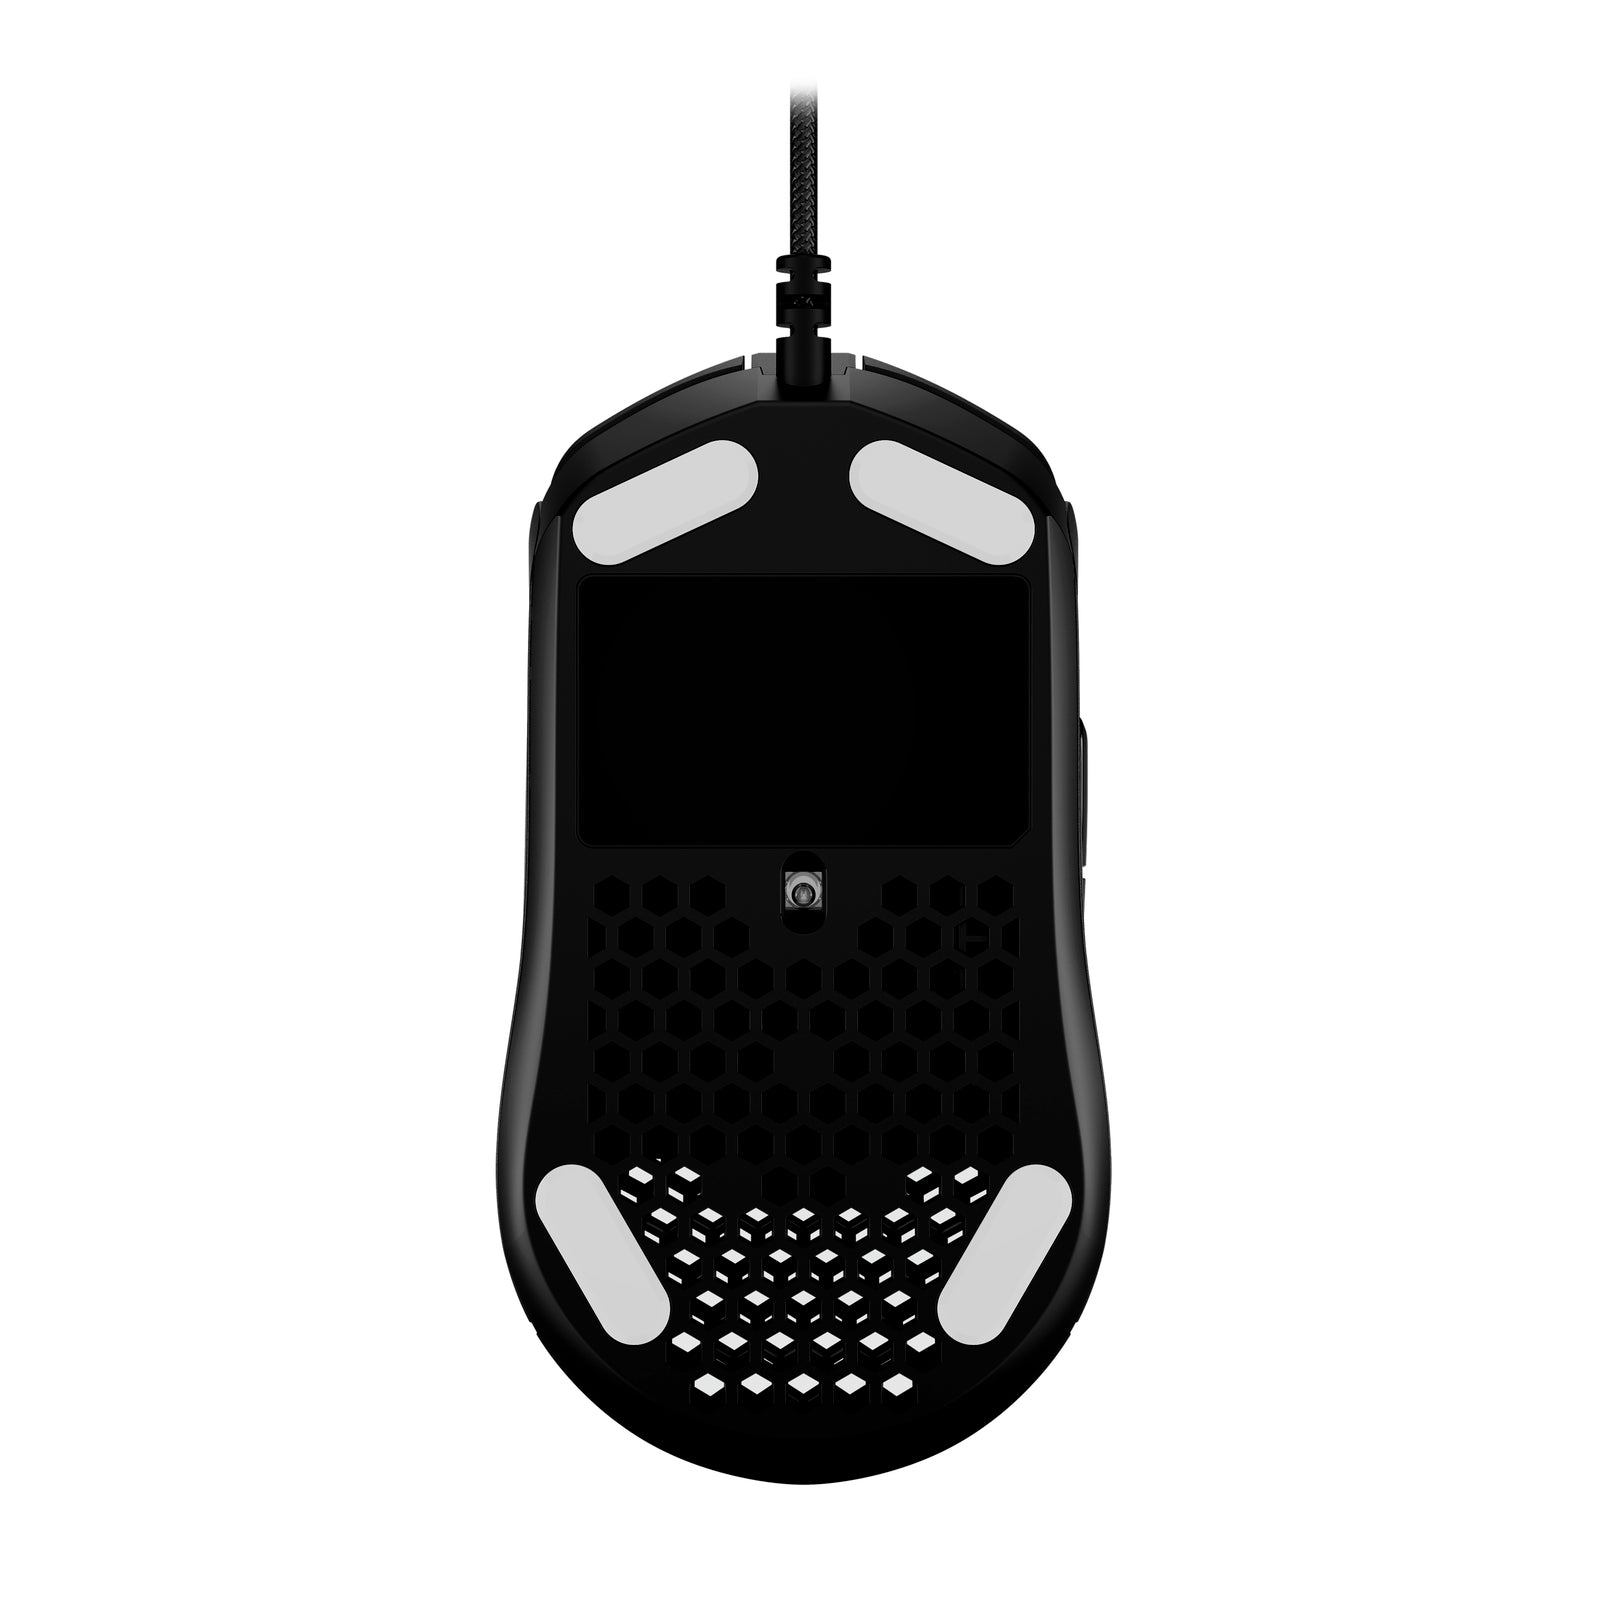 HyperX Pulsefire Haste Black Gaming Mouse bottom view